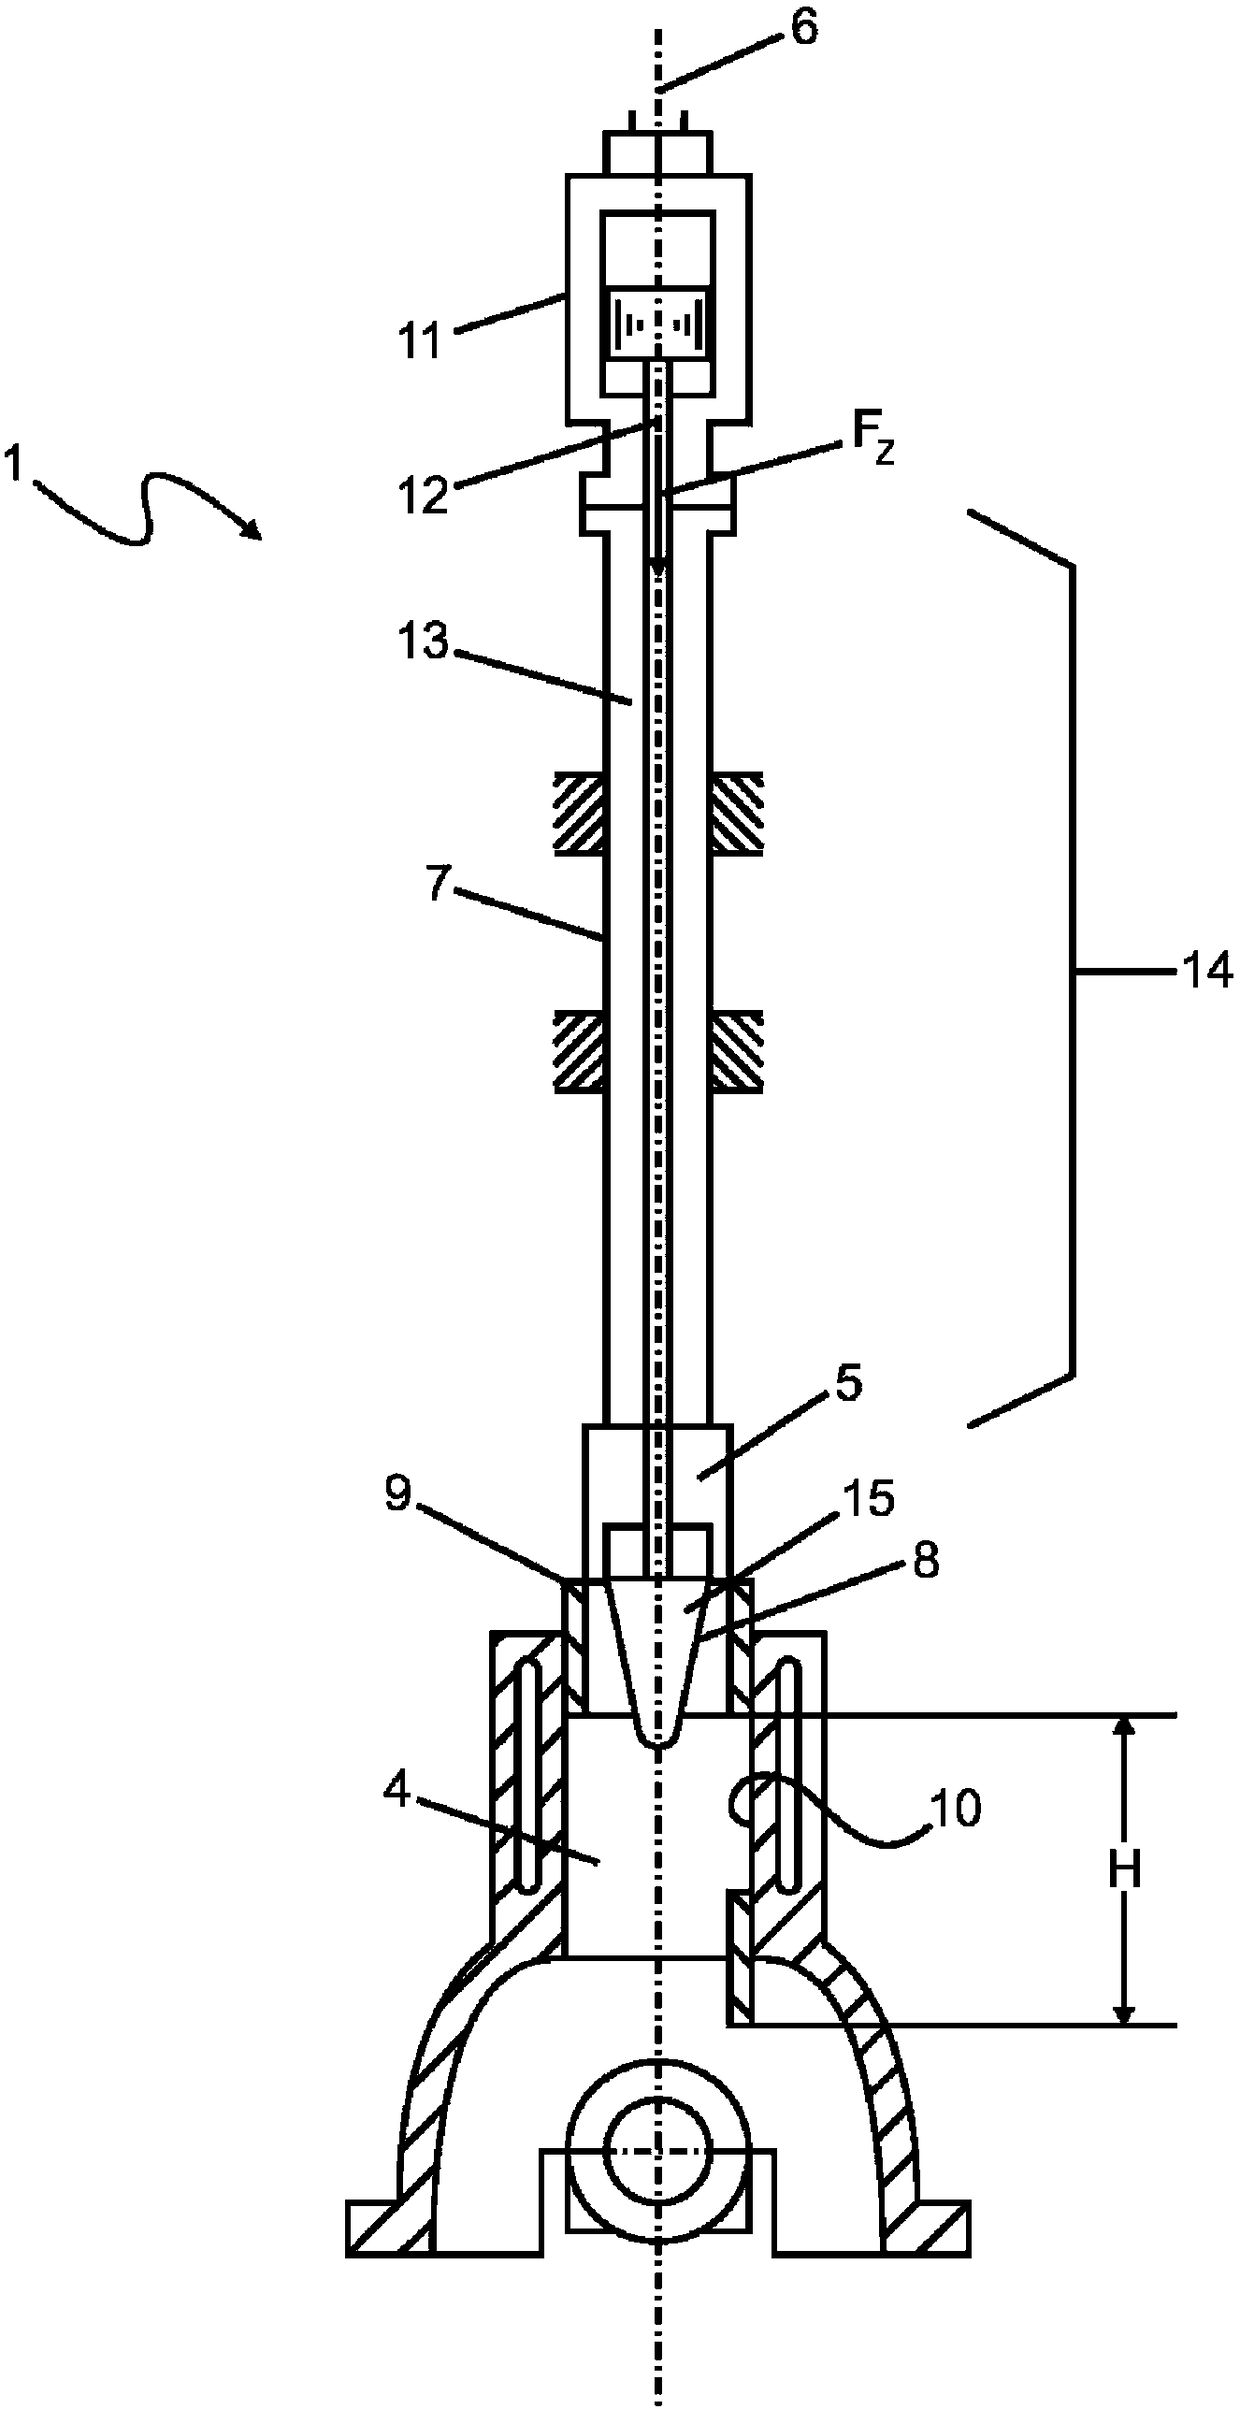 Feed device for producing a secondary feed movement of the tool